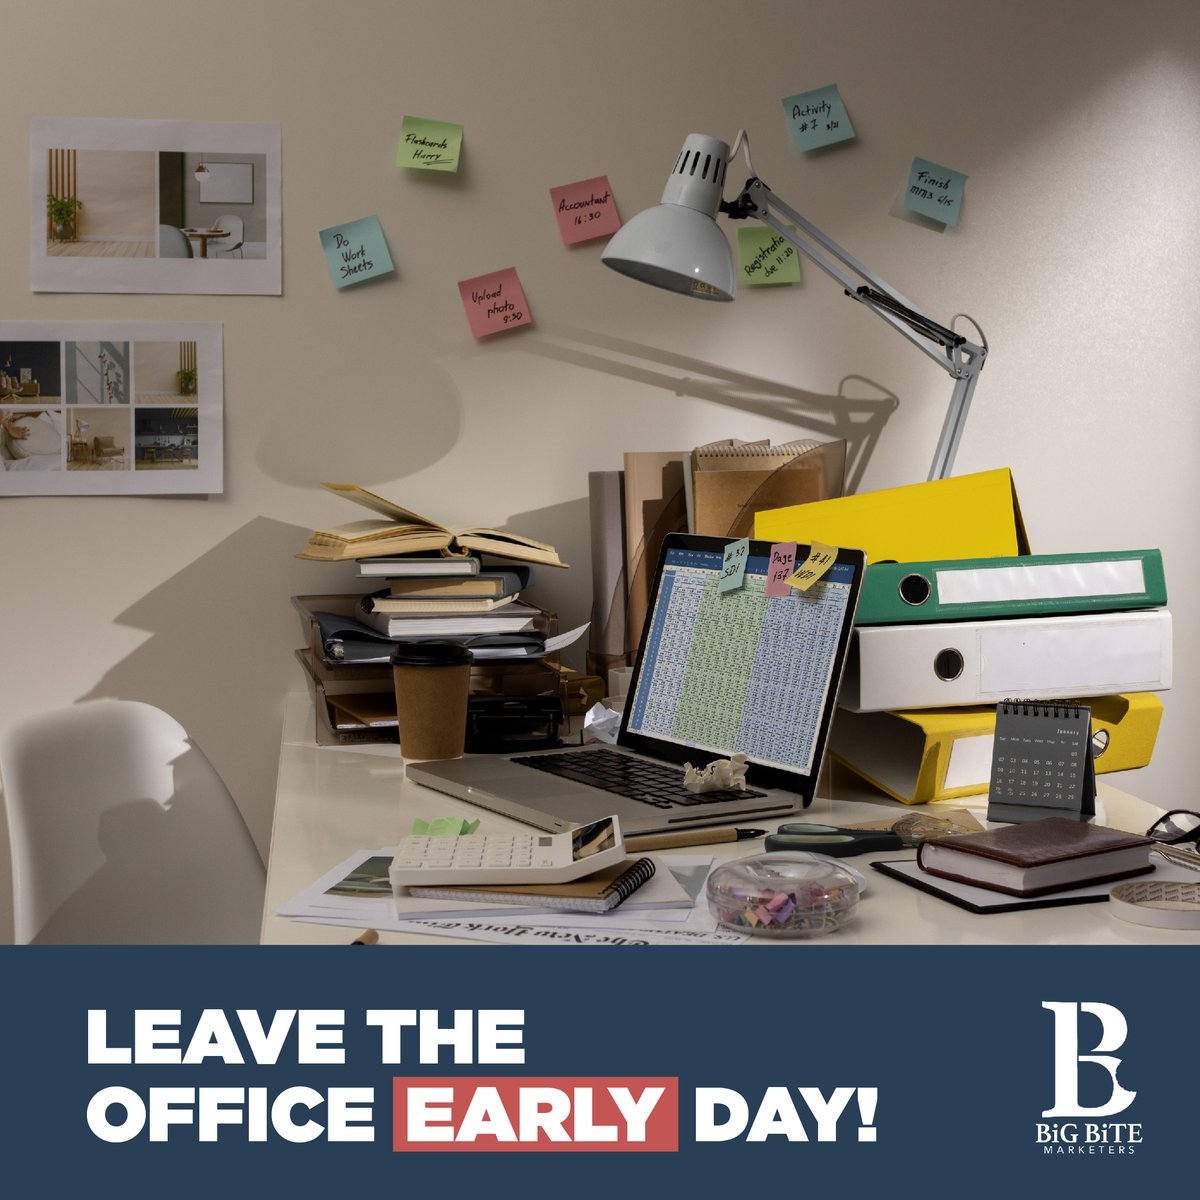 At Big Bite Marketers, we honor the National Leave your Office Early Day, but not without meeting our deadlines. Trust us 😉.

#BigBiteMarketers #BBM #DigitalMarketingAgency #Marketing #ContentMarketing #Texas  #SocialMedia #organiccontent #office #NationalLeavetheofficeEarlyDay